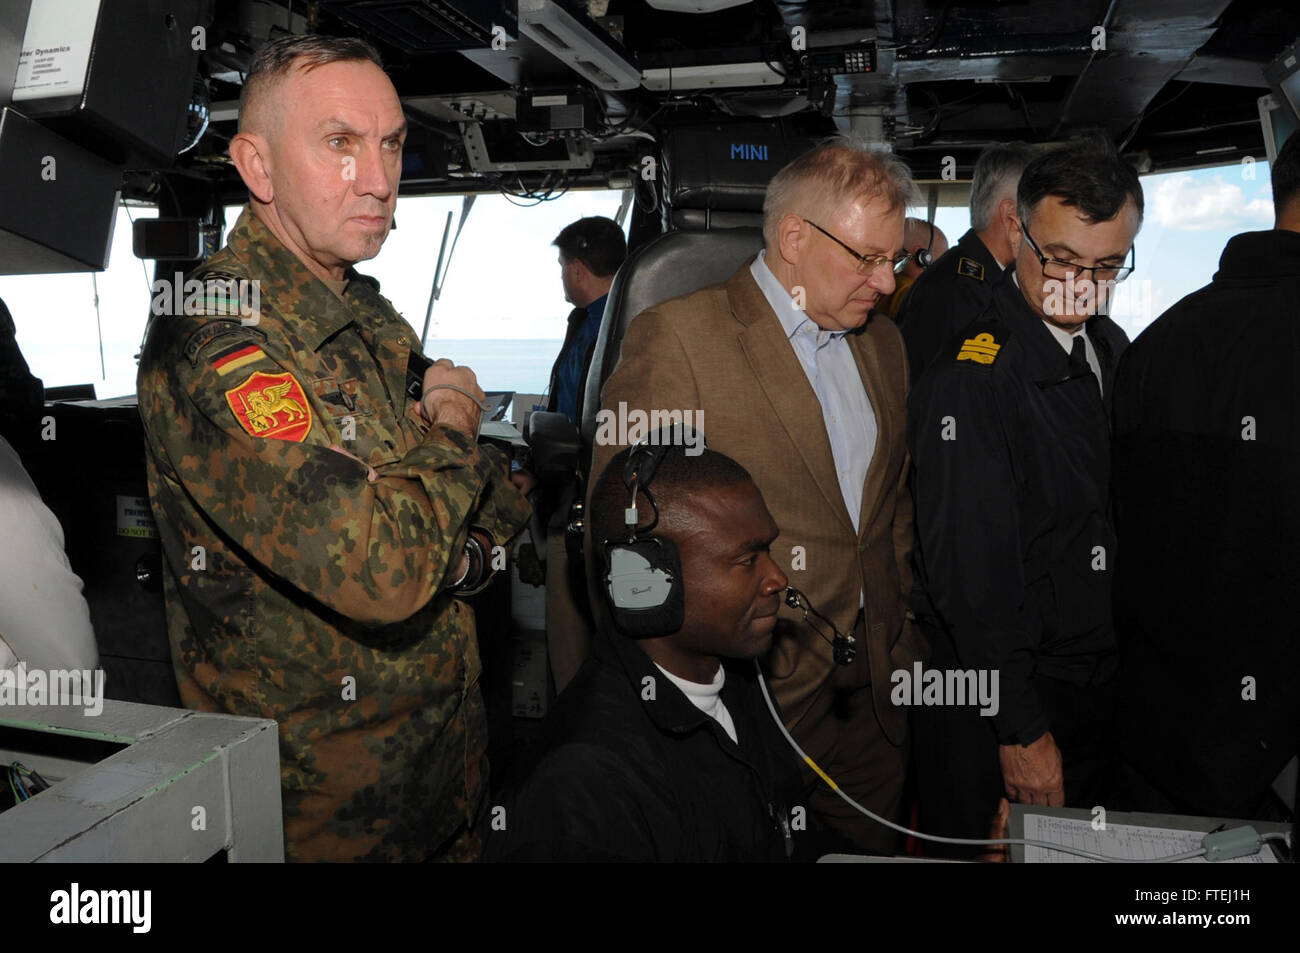 MEDITERRANEAN SEA (Oct. 30, 2014) Distinguished visitors from various Baltic nations tour the aircraft carrier USS George H.W. Bush (CVN 77). George H.W. Bush, homeported in Norfolk, Va., is conducting naval operations in the U.S. 6th Fleet area of operations in support of U.S. national security interests in Europe. Stock Photo